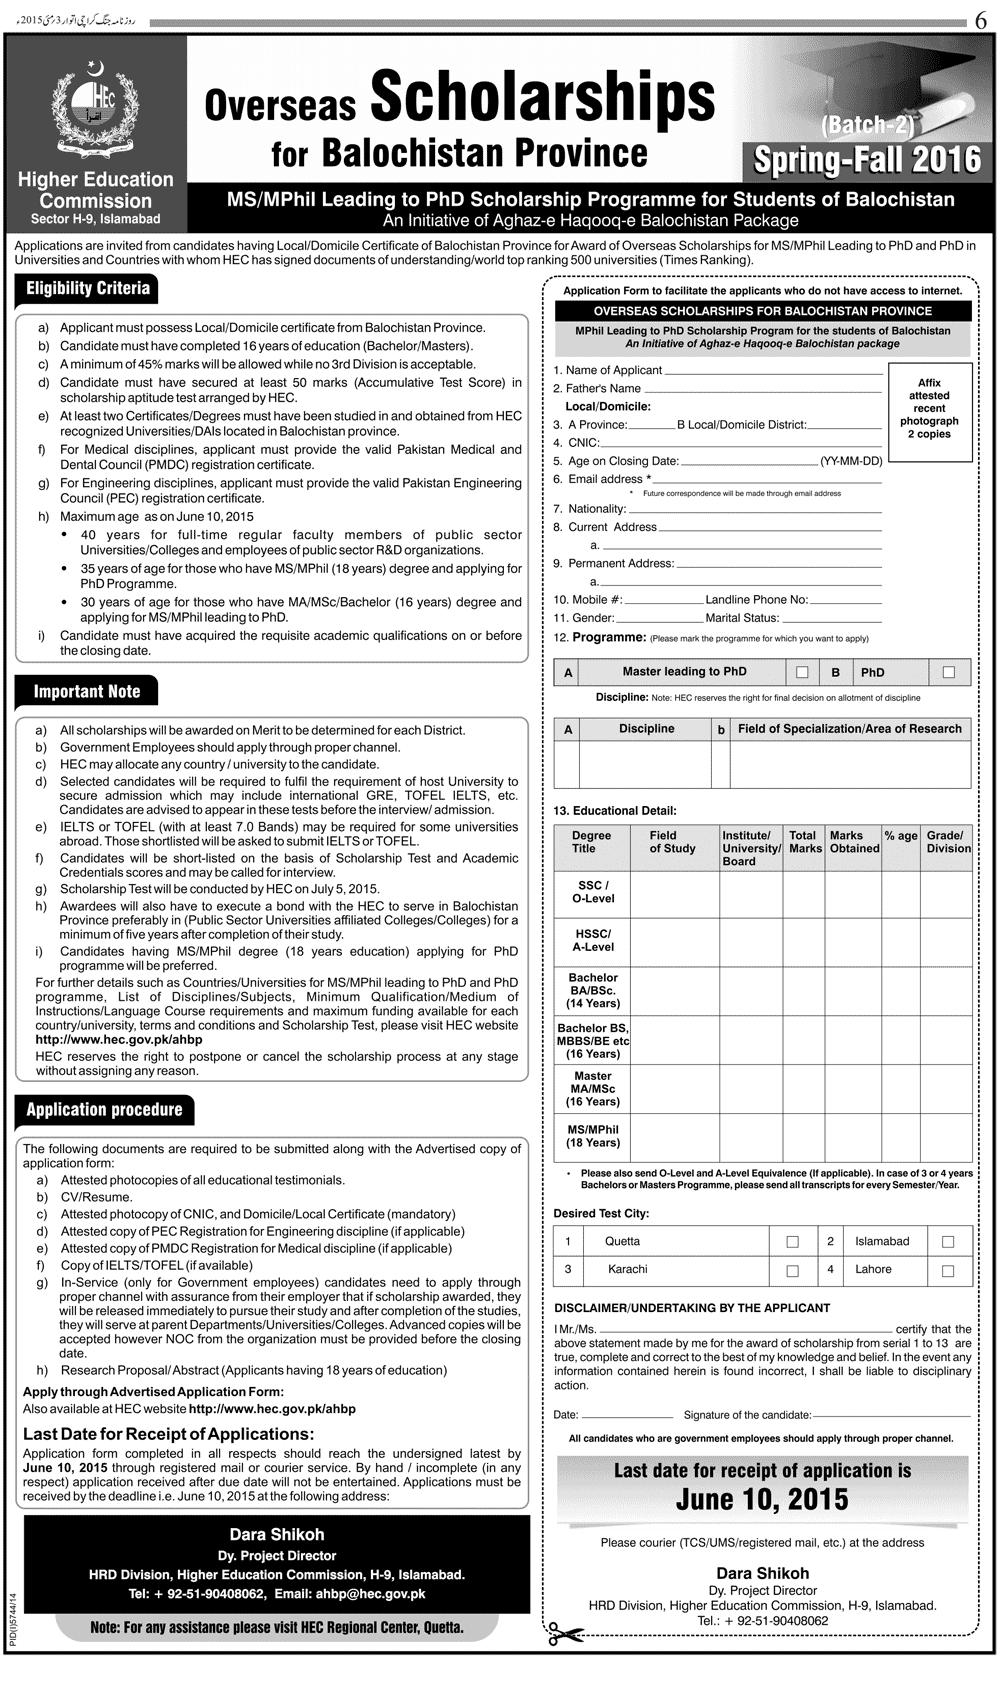 ... Scholarships For Balochistan 2016 MS, M.Phil Application Form Download